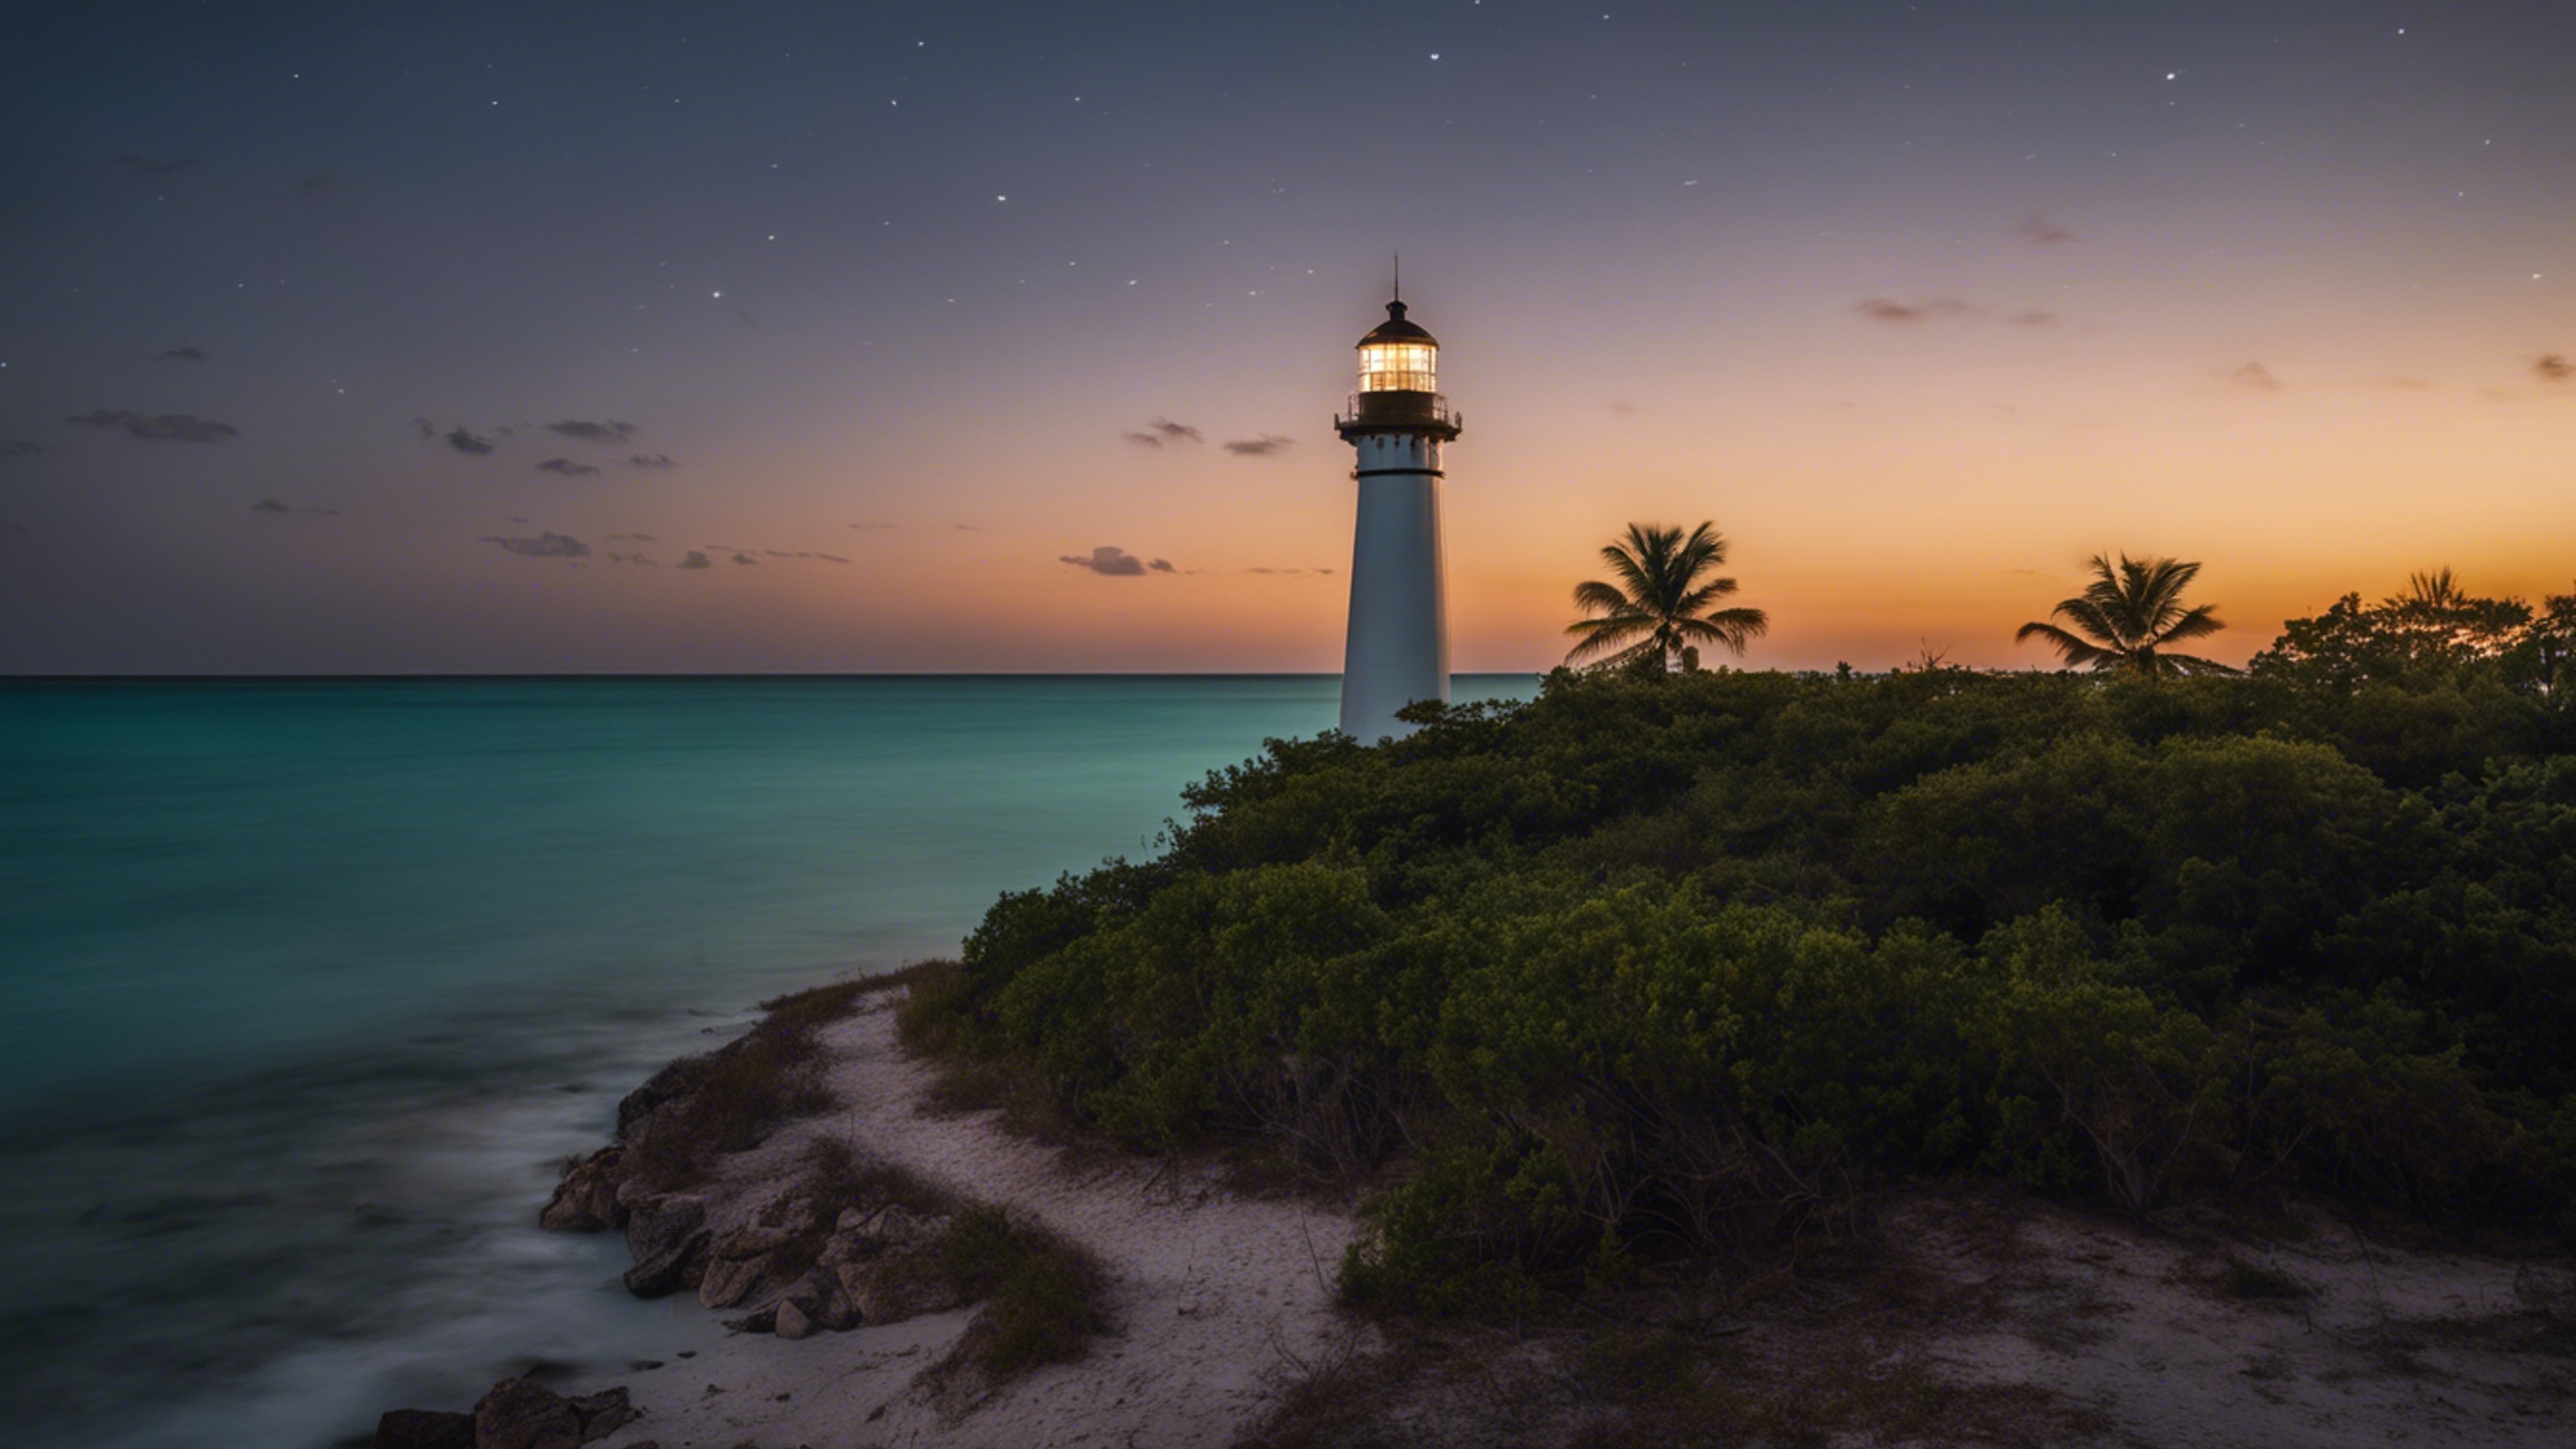 A night shot of an historic lighthouse in Key Biscayne, with the beam of light cutting through the darkness. Tapeta[4d5993bb763c4a90b239]